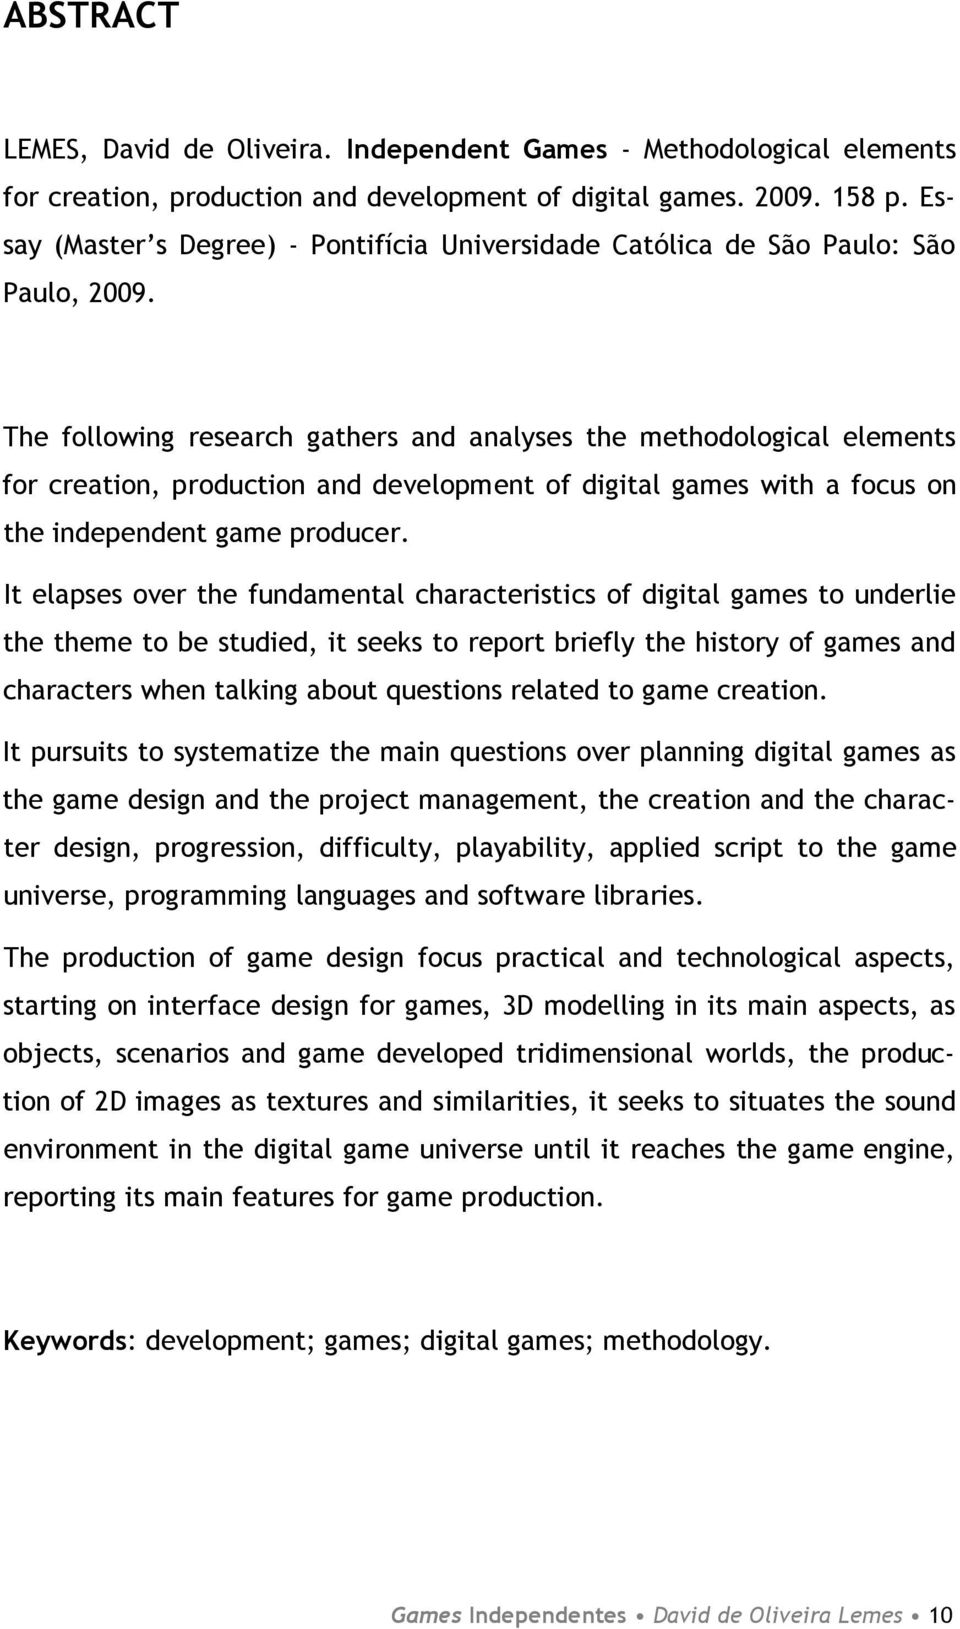 The following research gathers and analyses the methodological elements for creation, production and development of digital games with a focus on the independent game producer.